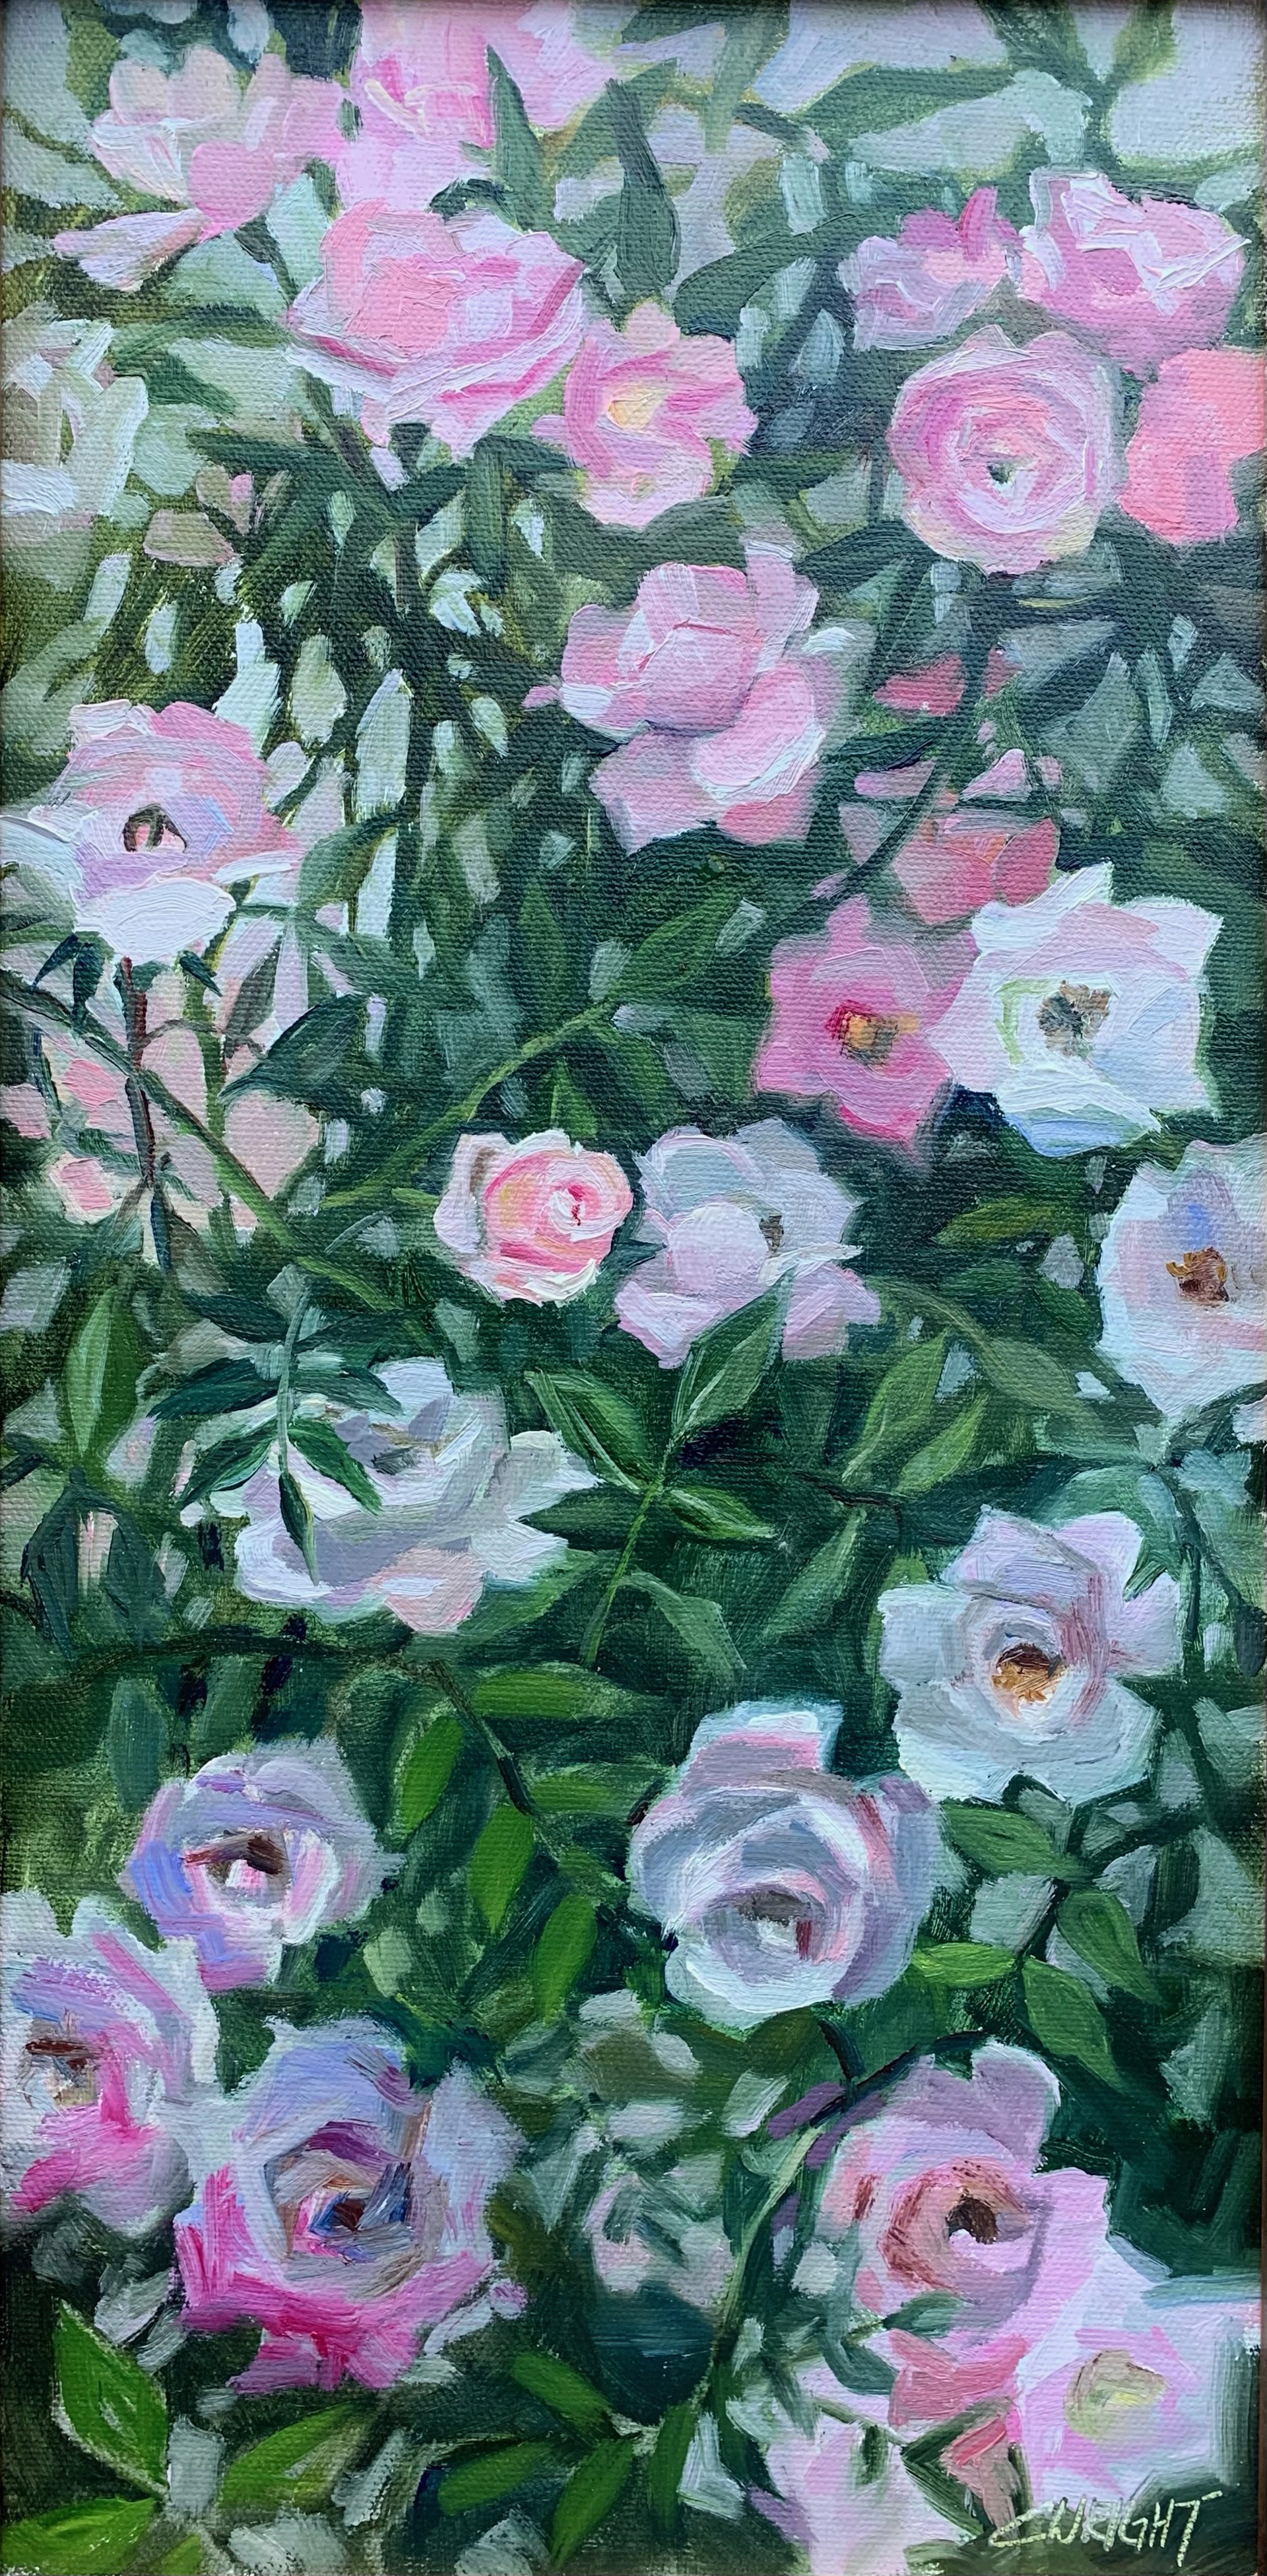 Winter Garden Roses by Cory Wright